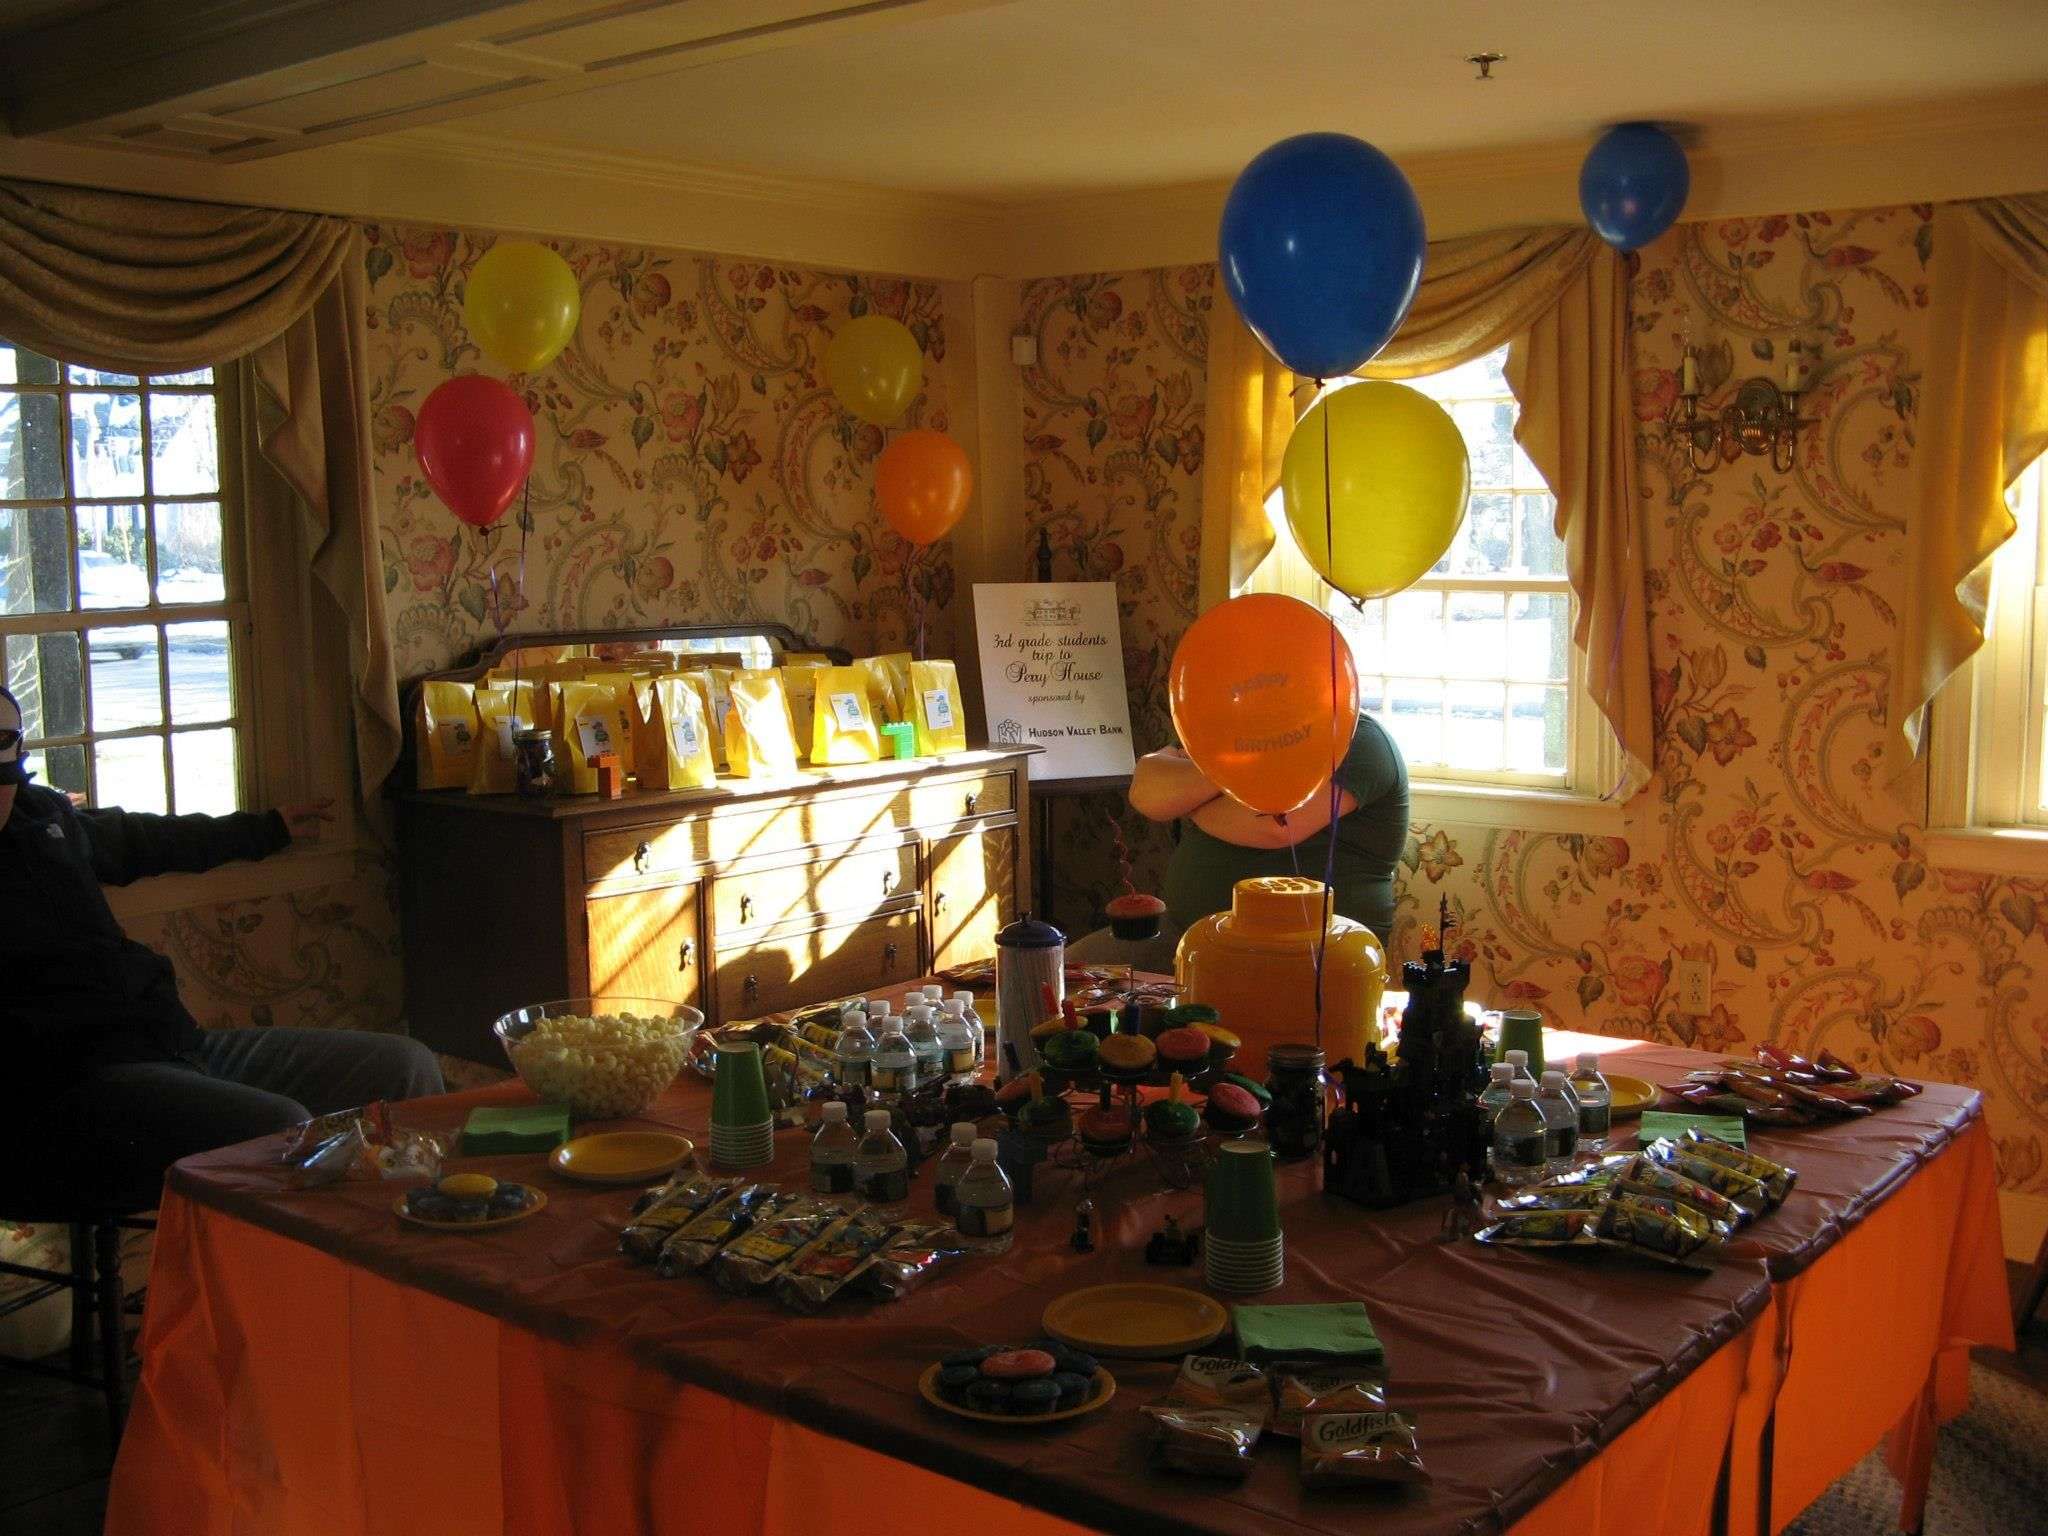 Fun and Cheap Fairfield County Rental Halls for Birthday ...